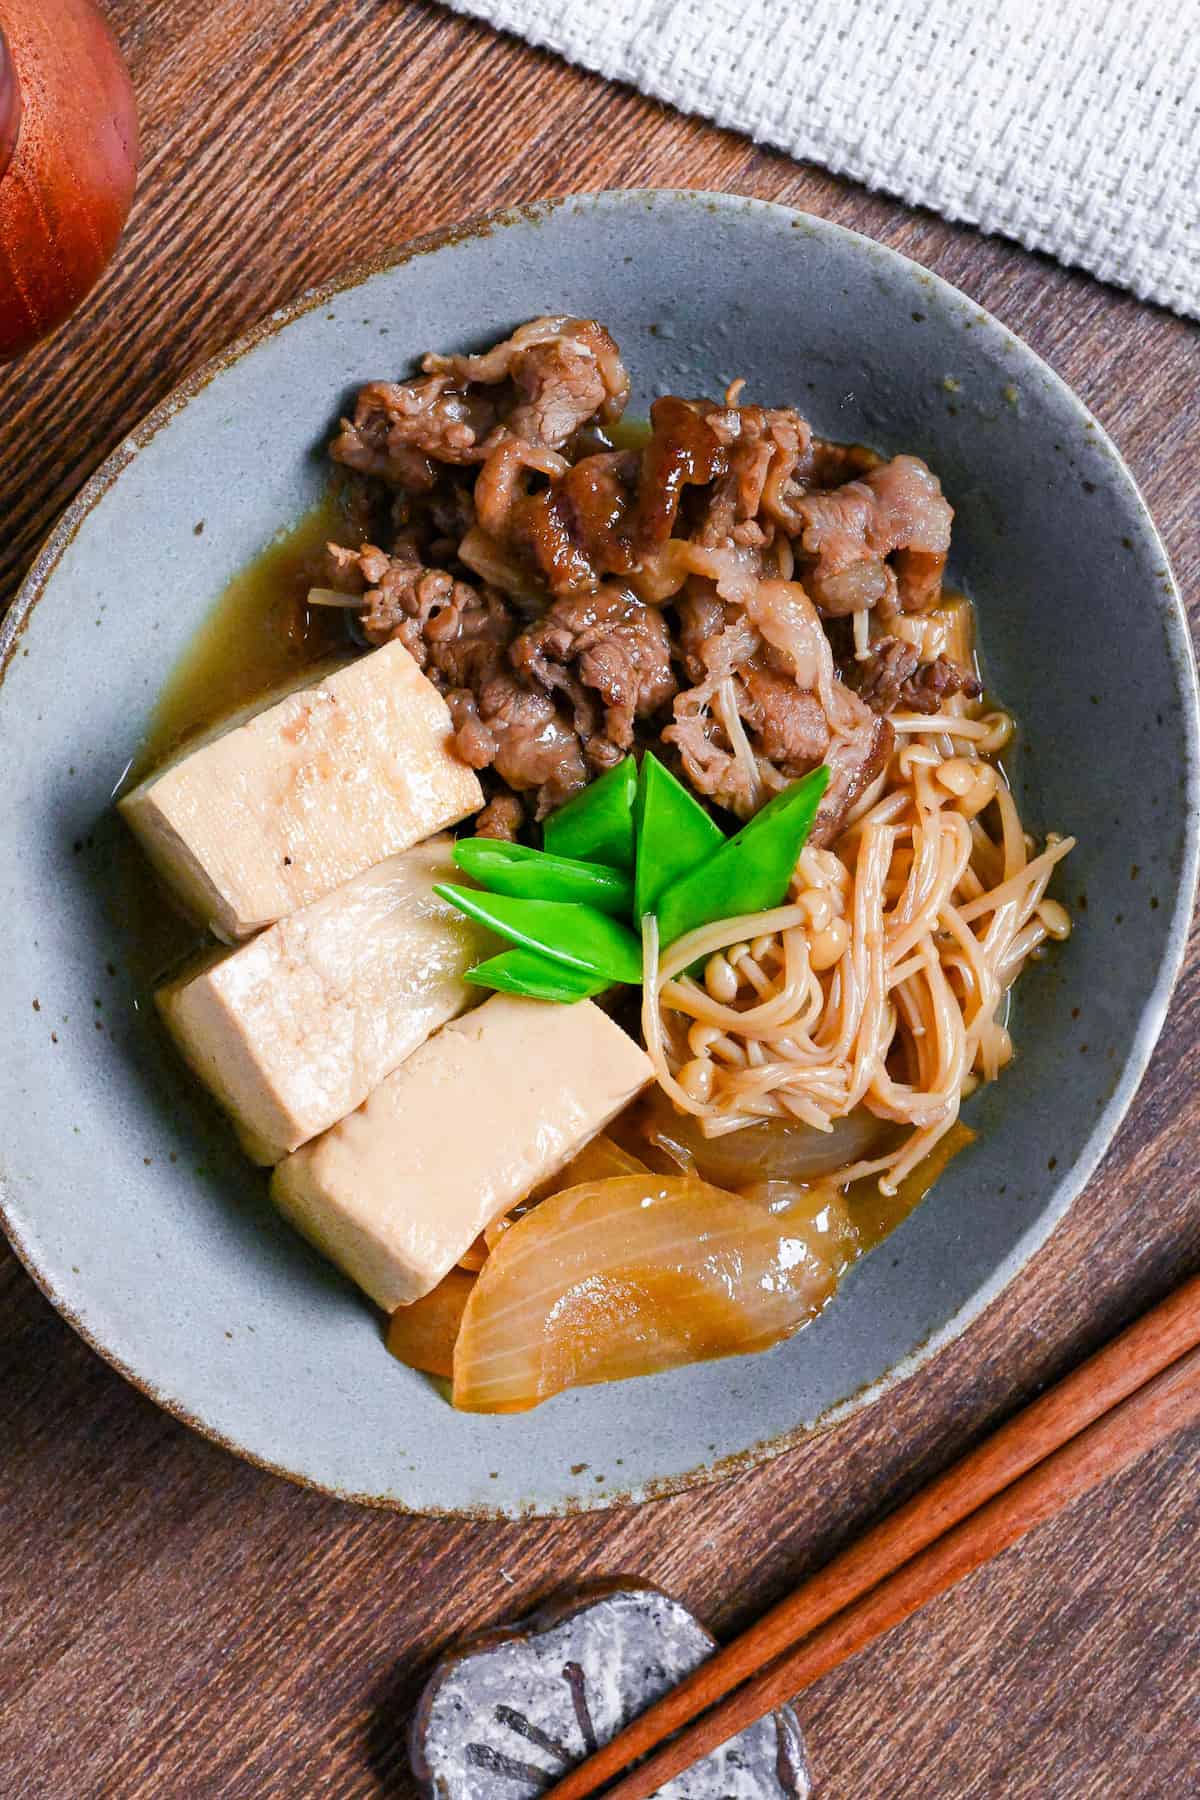 niku dofu in a eggshell blue bowl made with firm tofu, thinly sliced beef, onions and enoki mushrooms simmered in a sweet and salty Japanese broth and topped with blanched snow peas on a wooden table